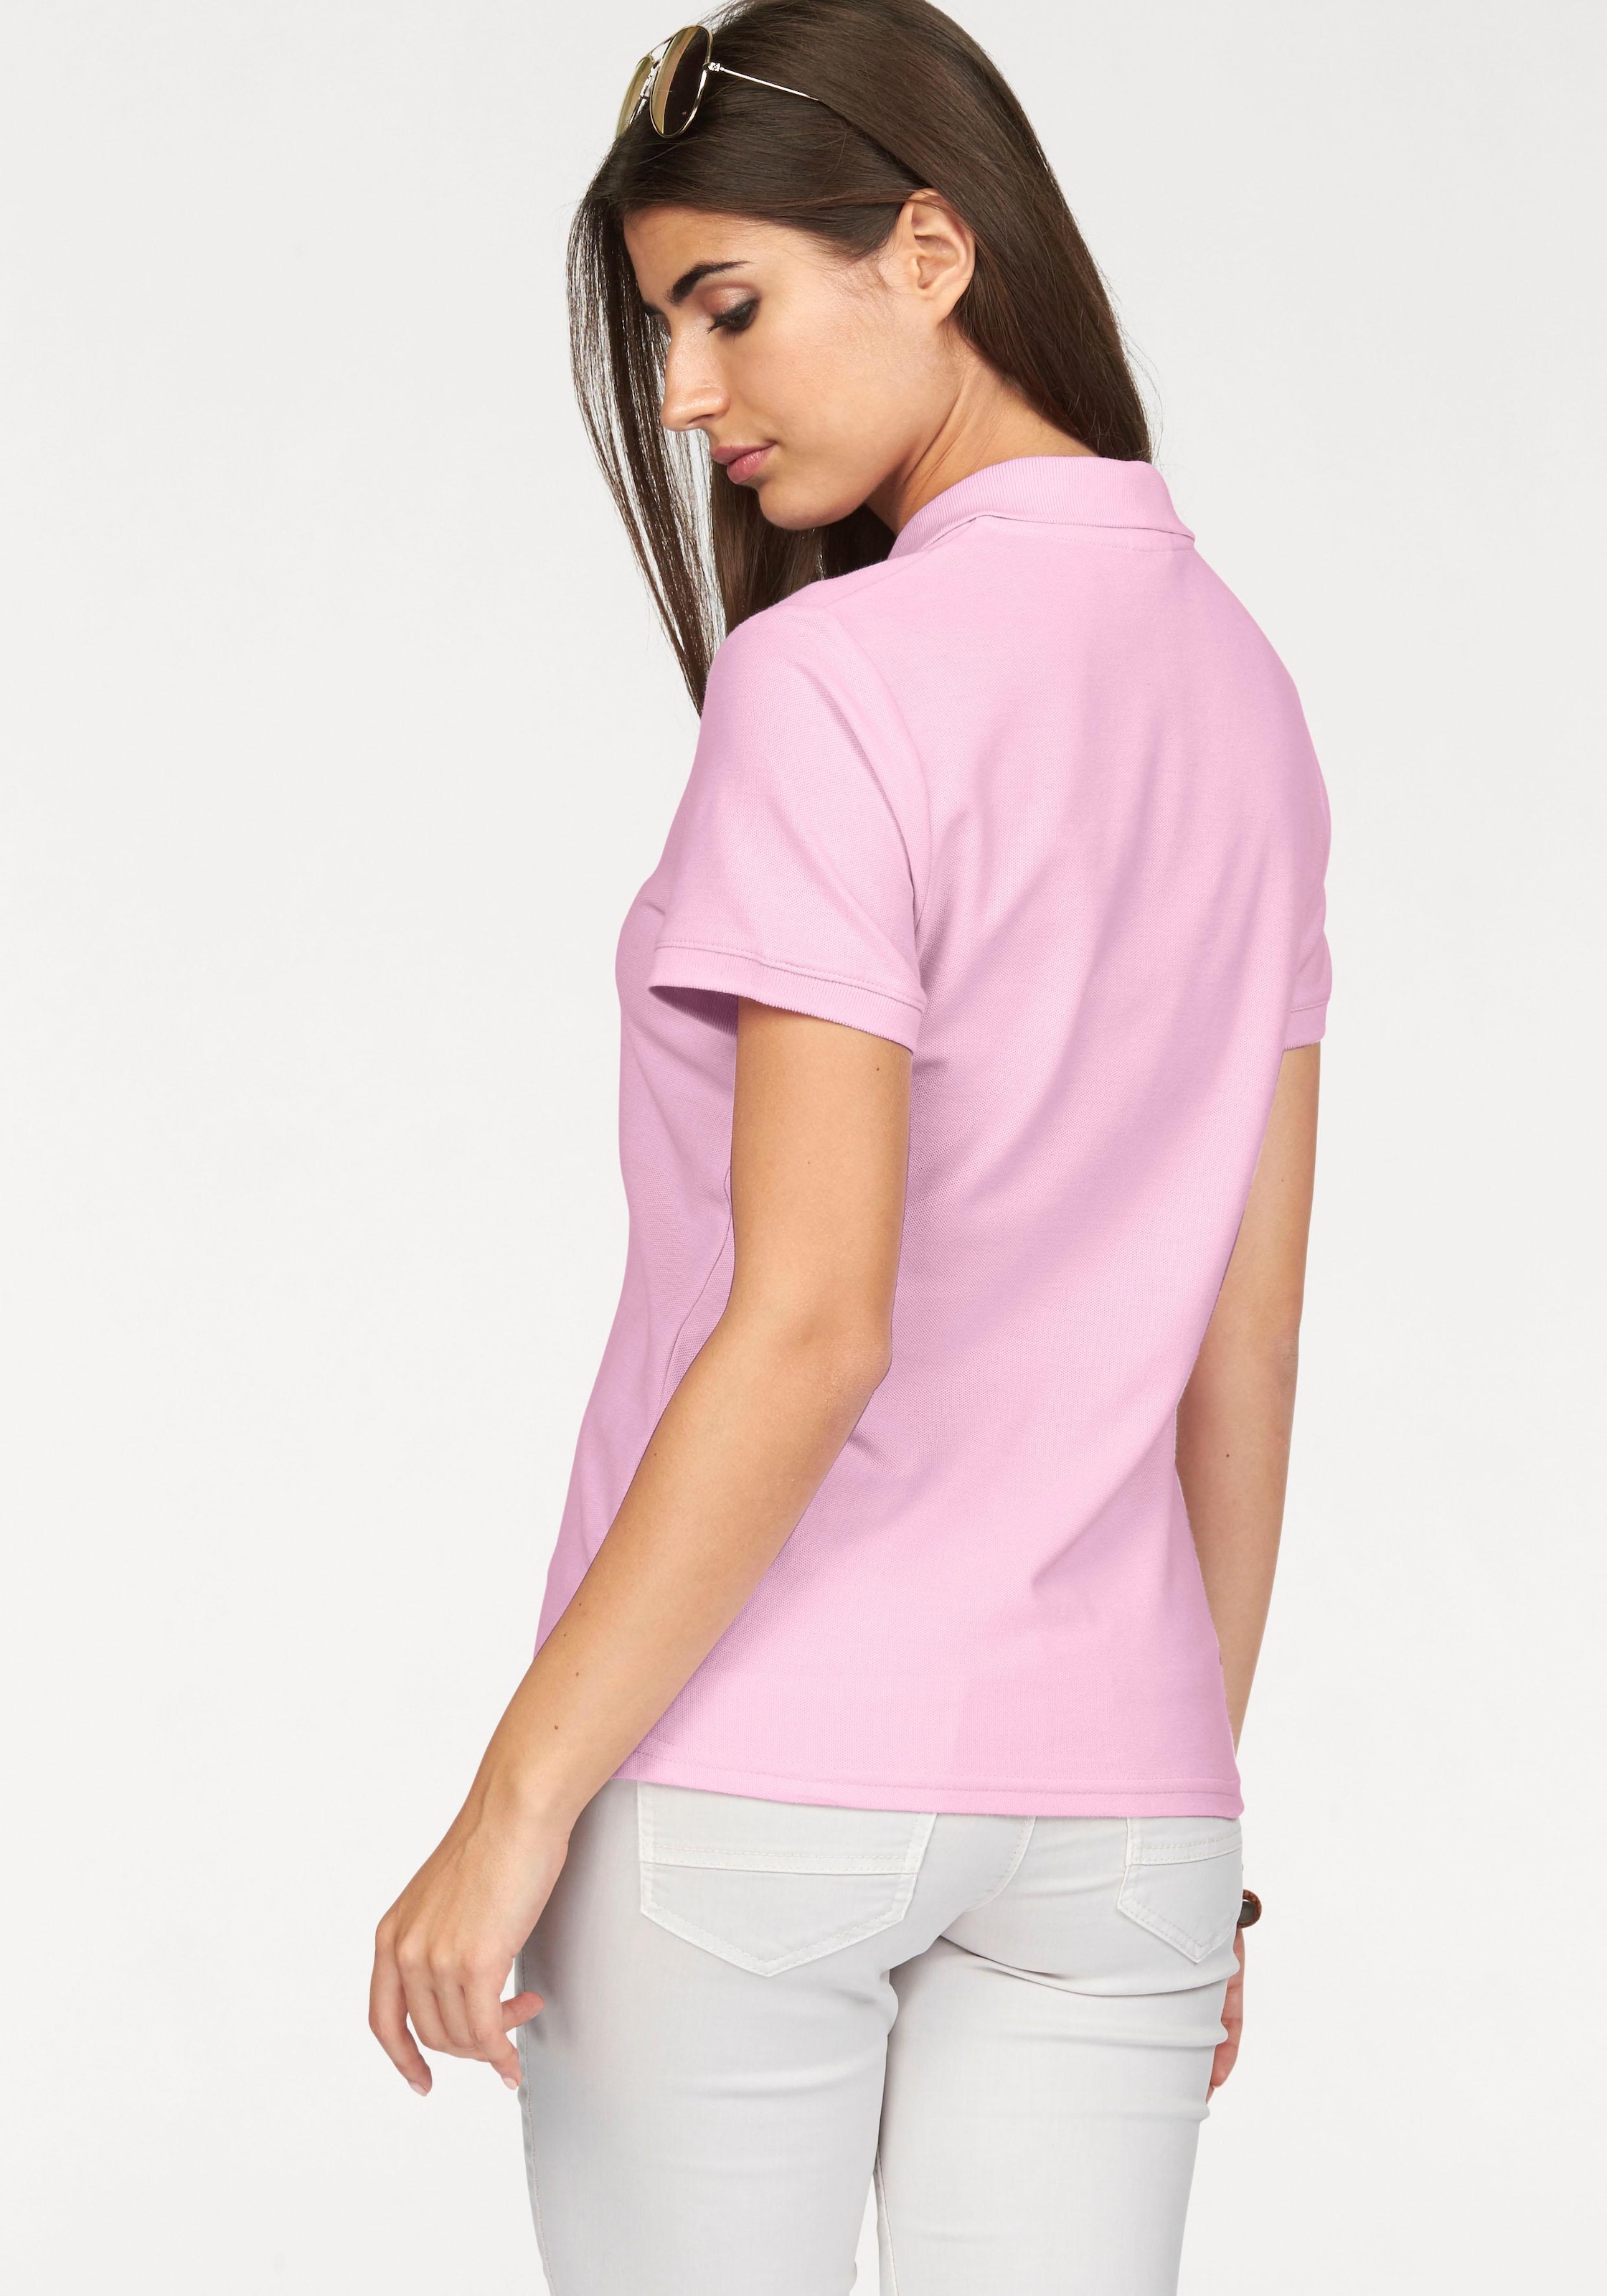 »Lady-Fit Fruit of OTTO Poloshirt bei Polo« Premium Loom online the